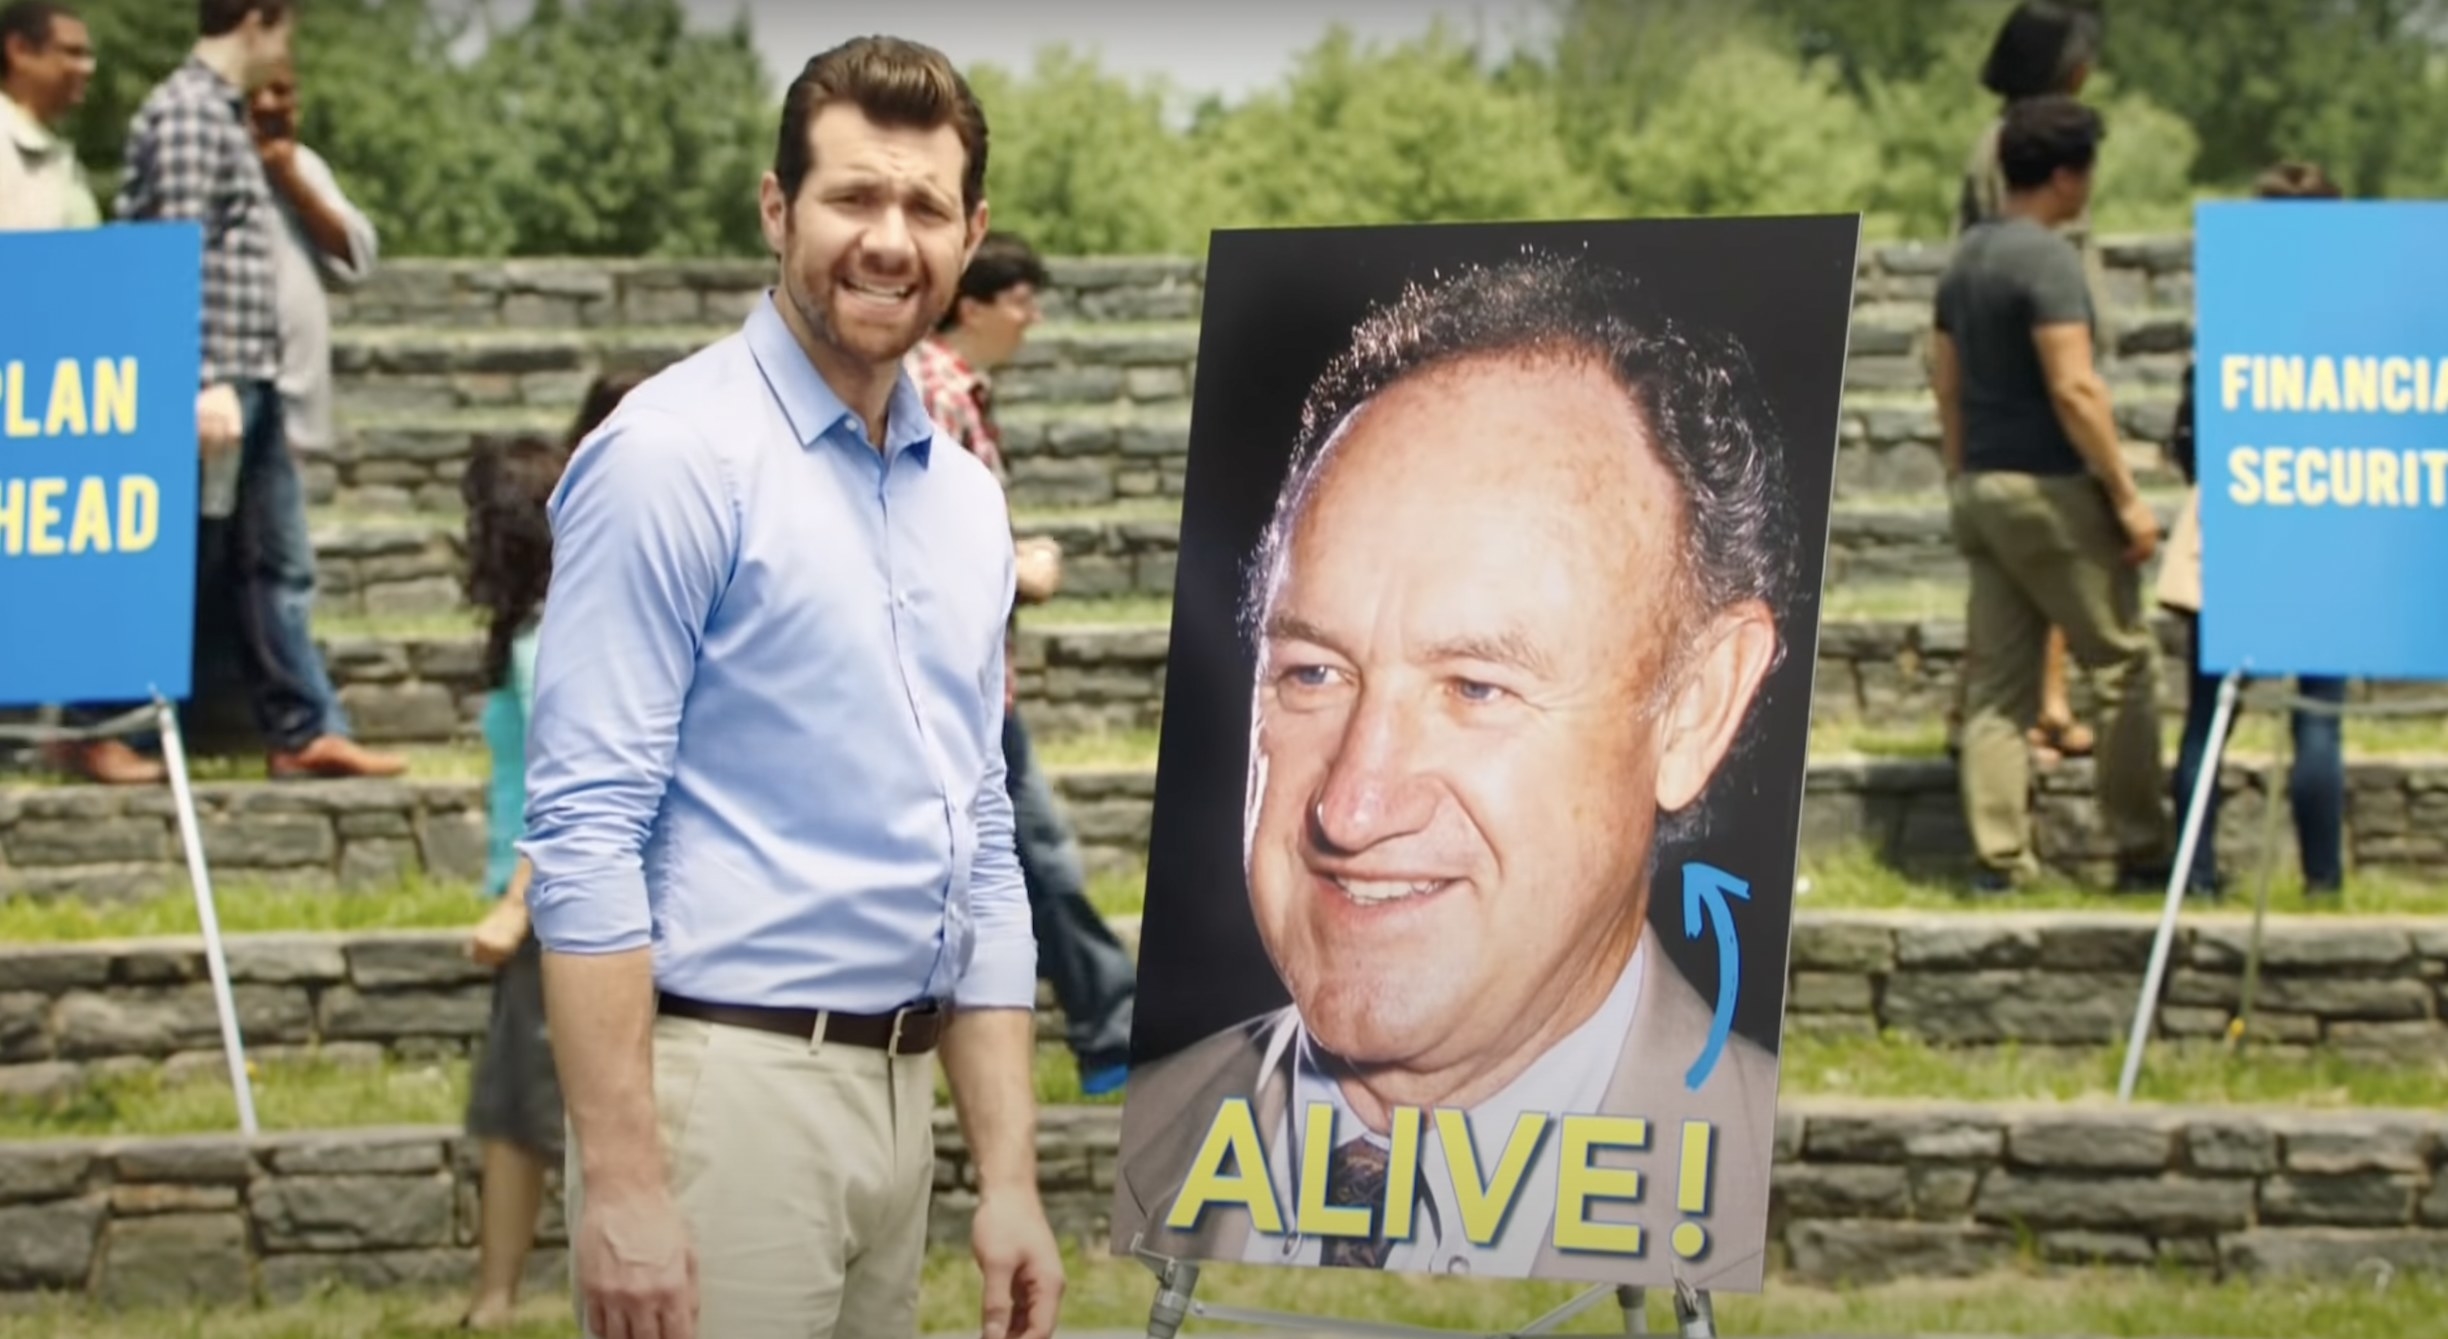 Billy Eichner standing in front of an image of Gene Hackman with ALIVE written under Hackmans face